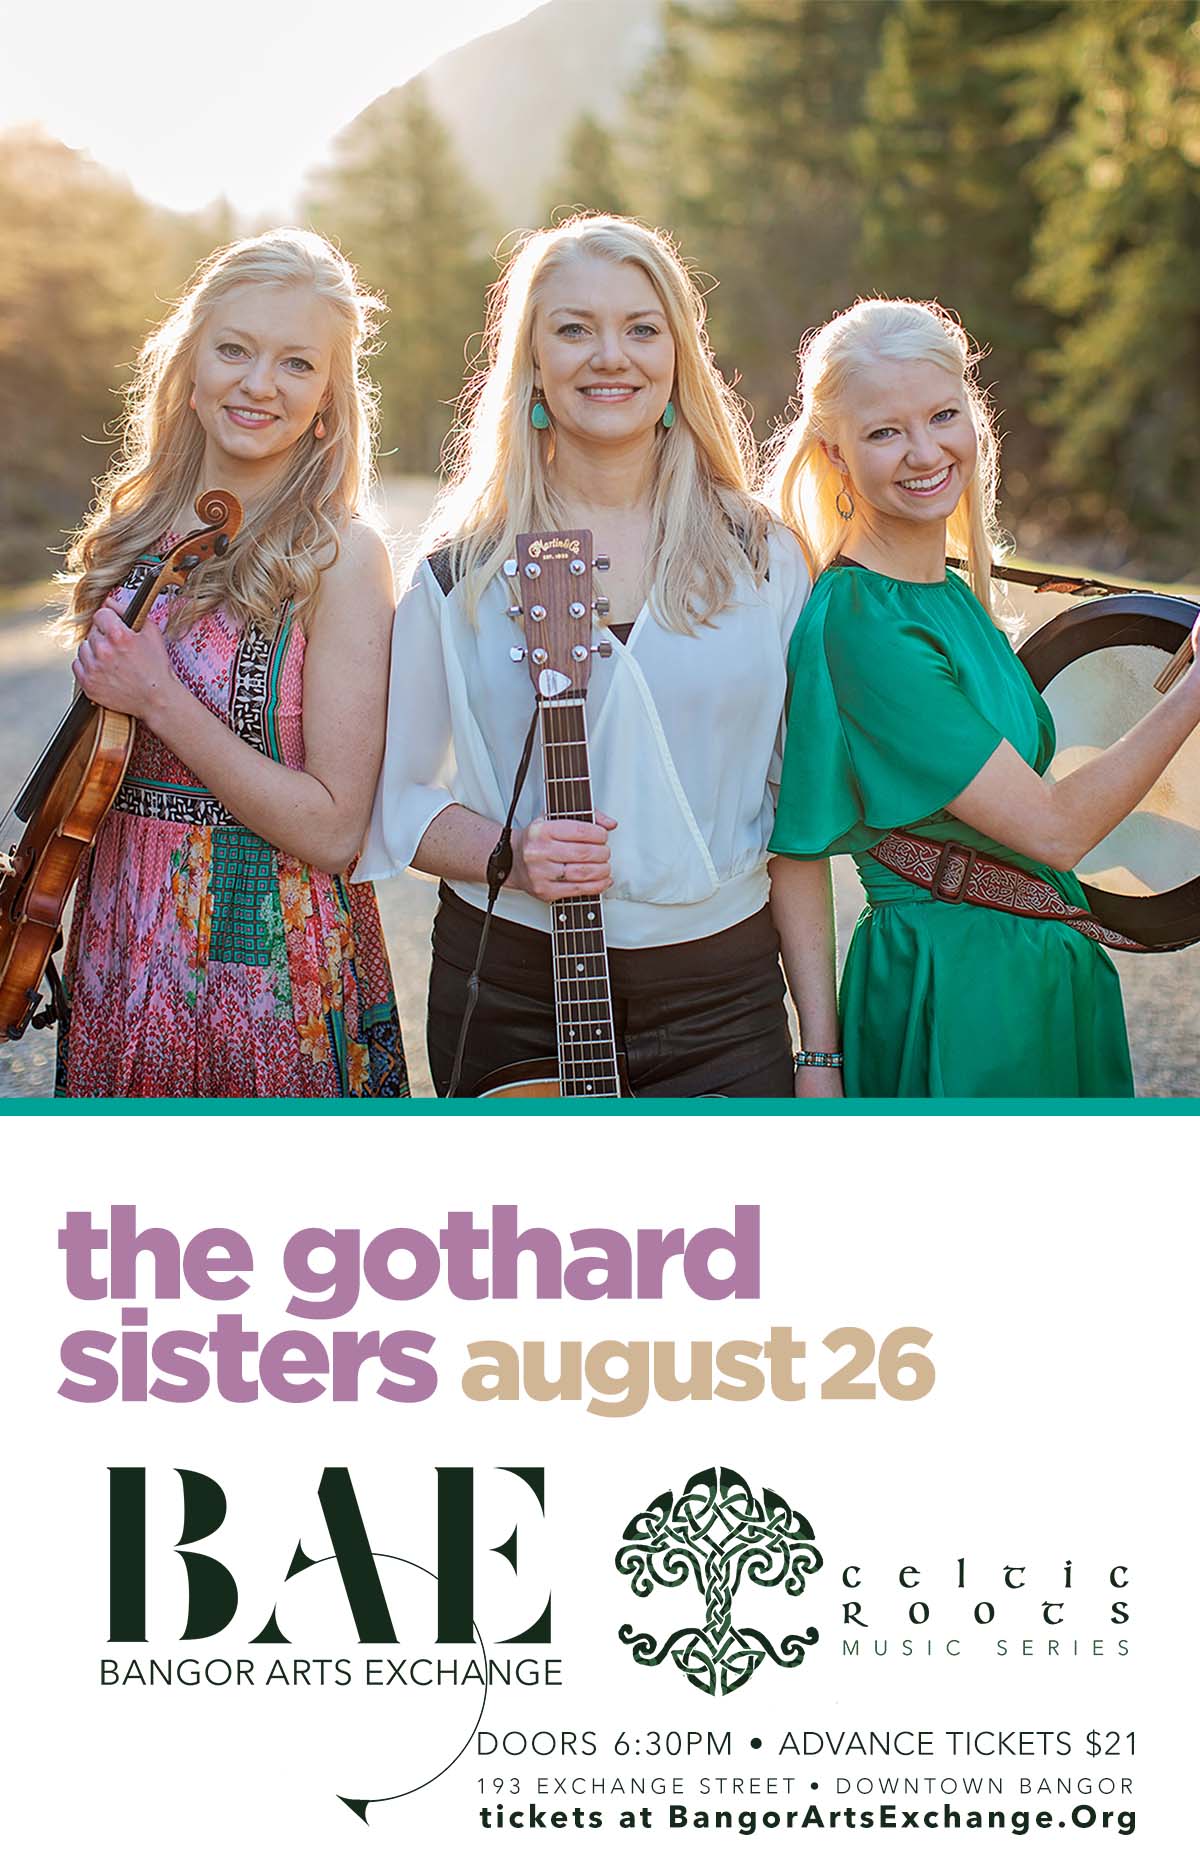 08/26/2022: The Gothard Sisters presented by Celtic Roots Music Series